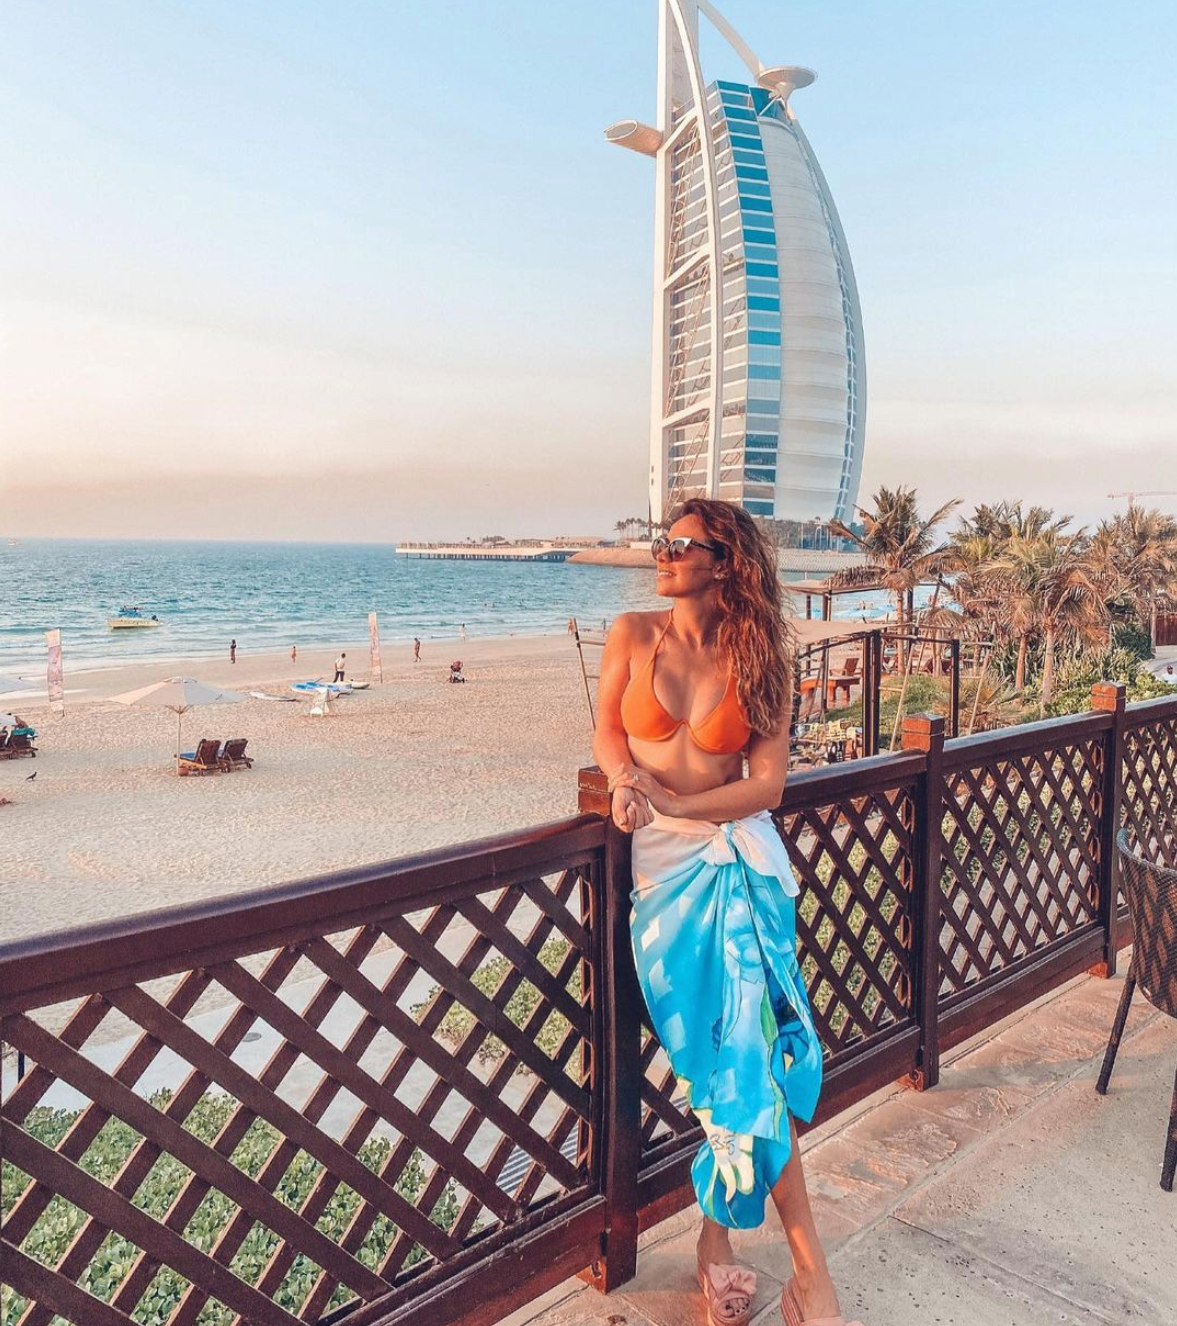 Instagram influencer in Dubai with the Madinat Jumeirah hotel in the background.